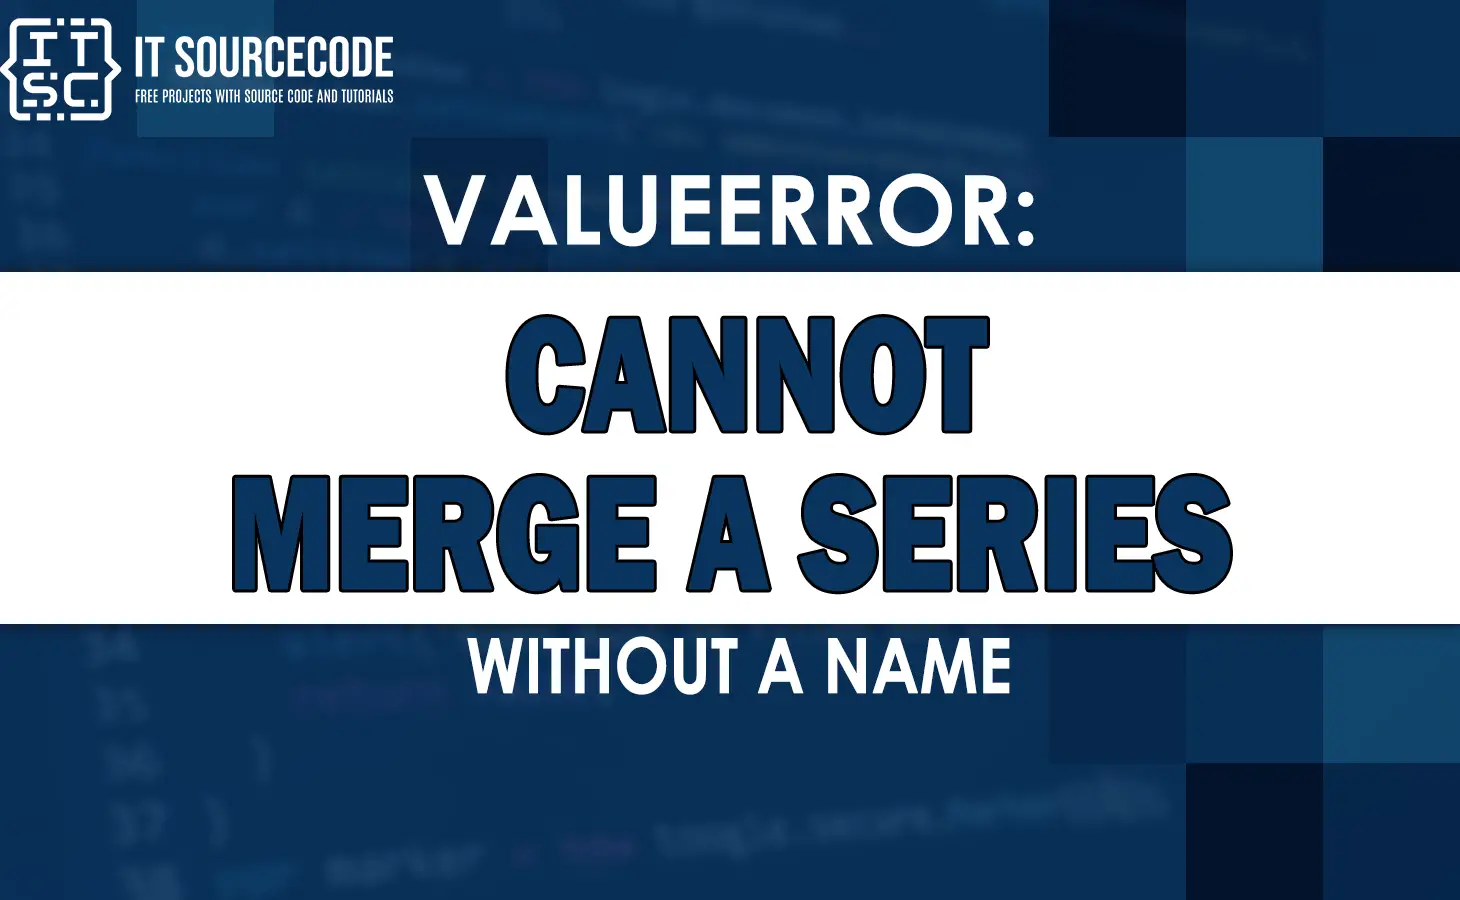 Valueerror cannot merge a series without a name